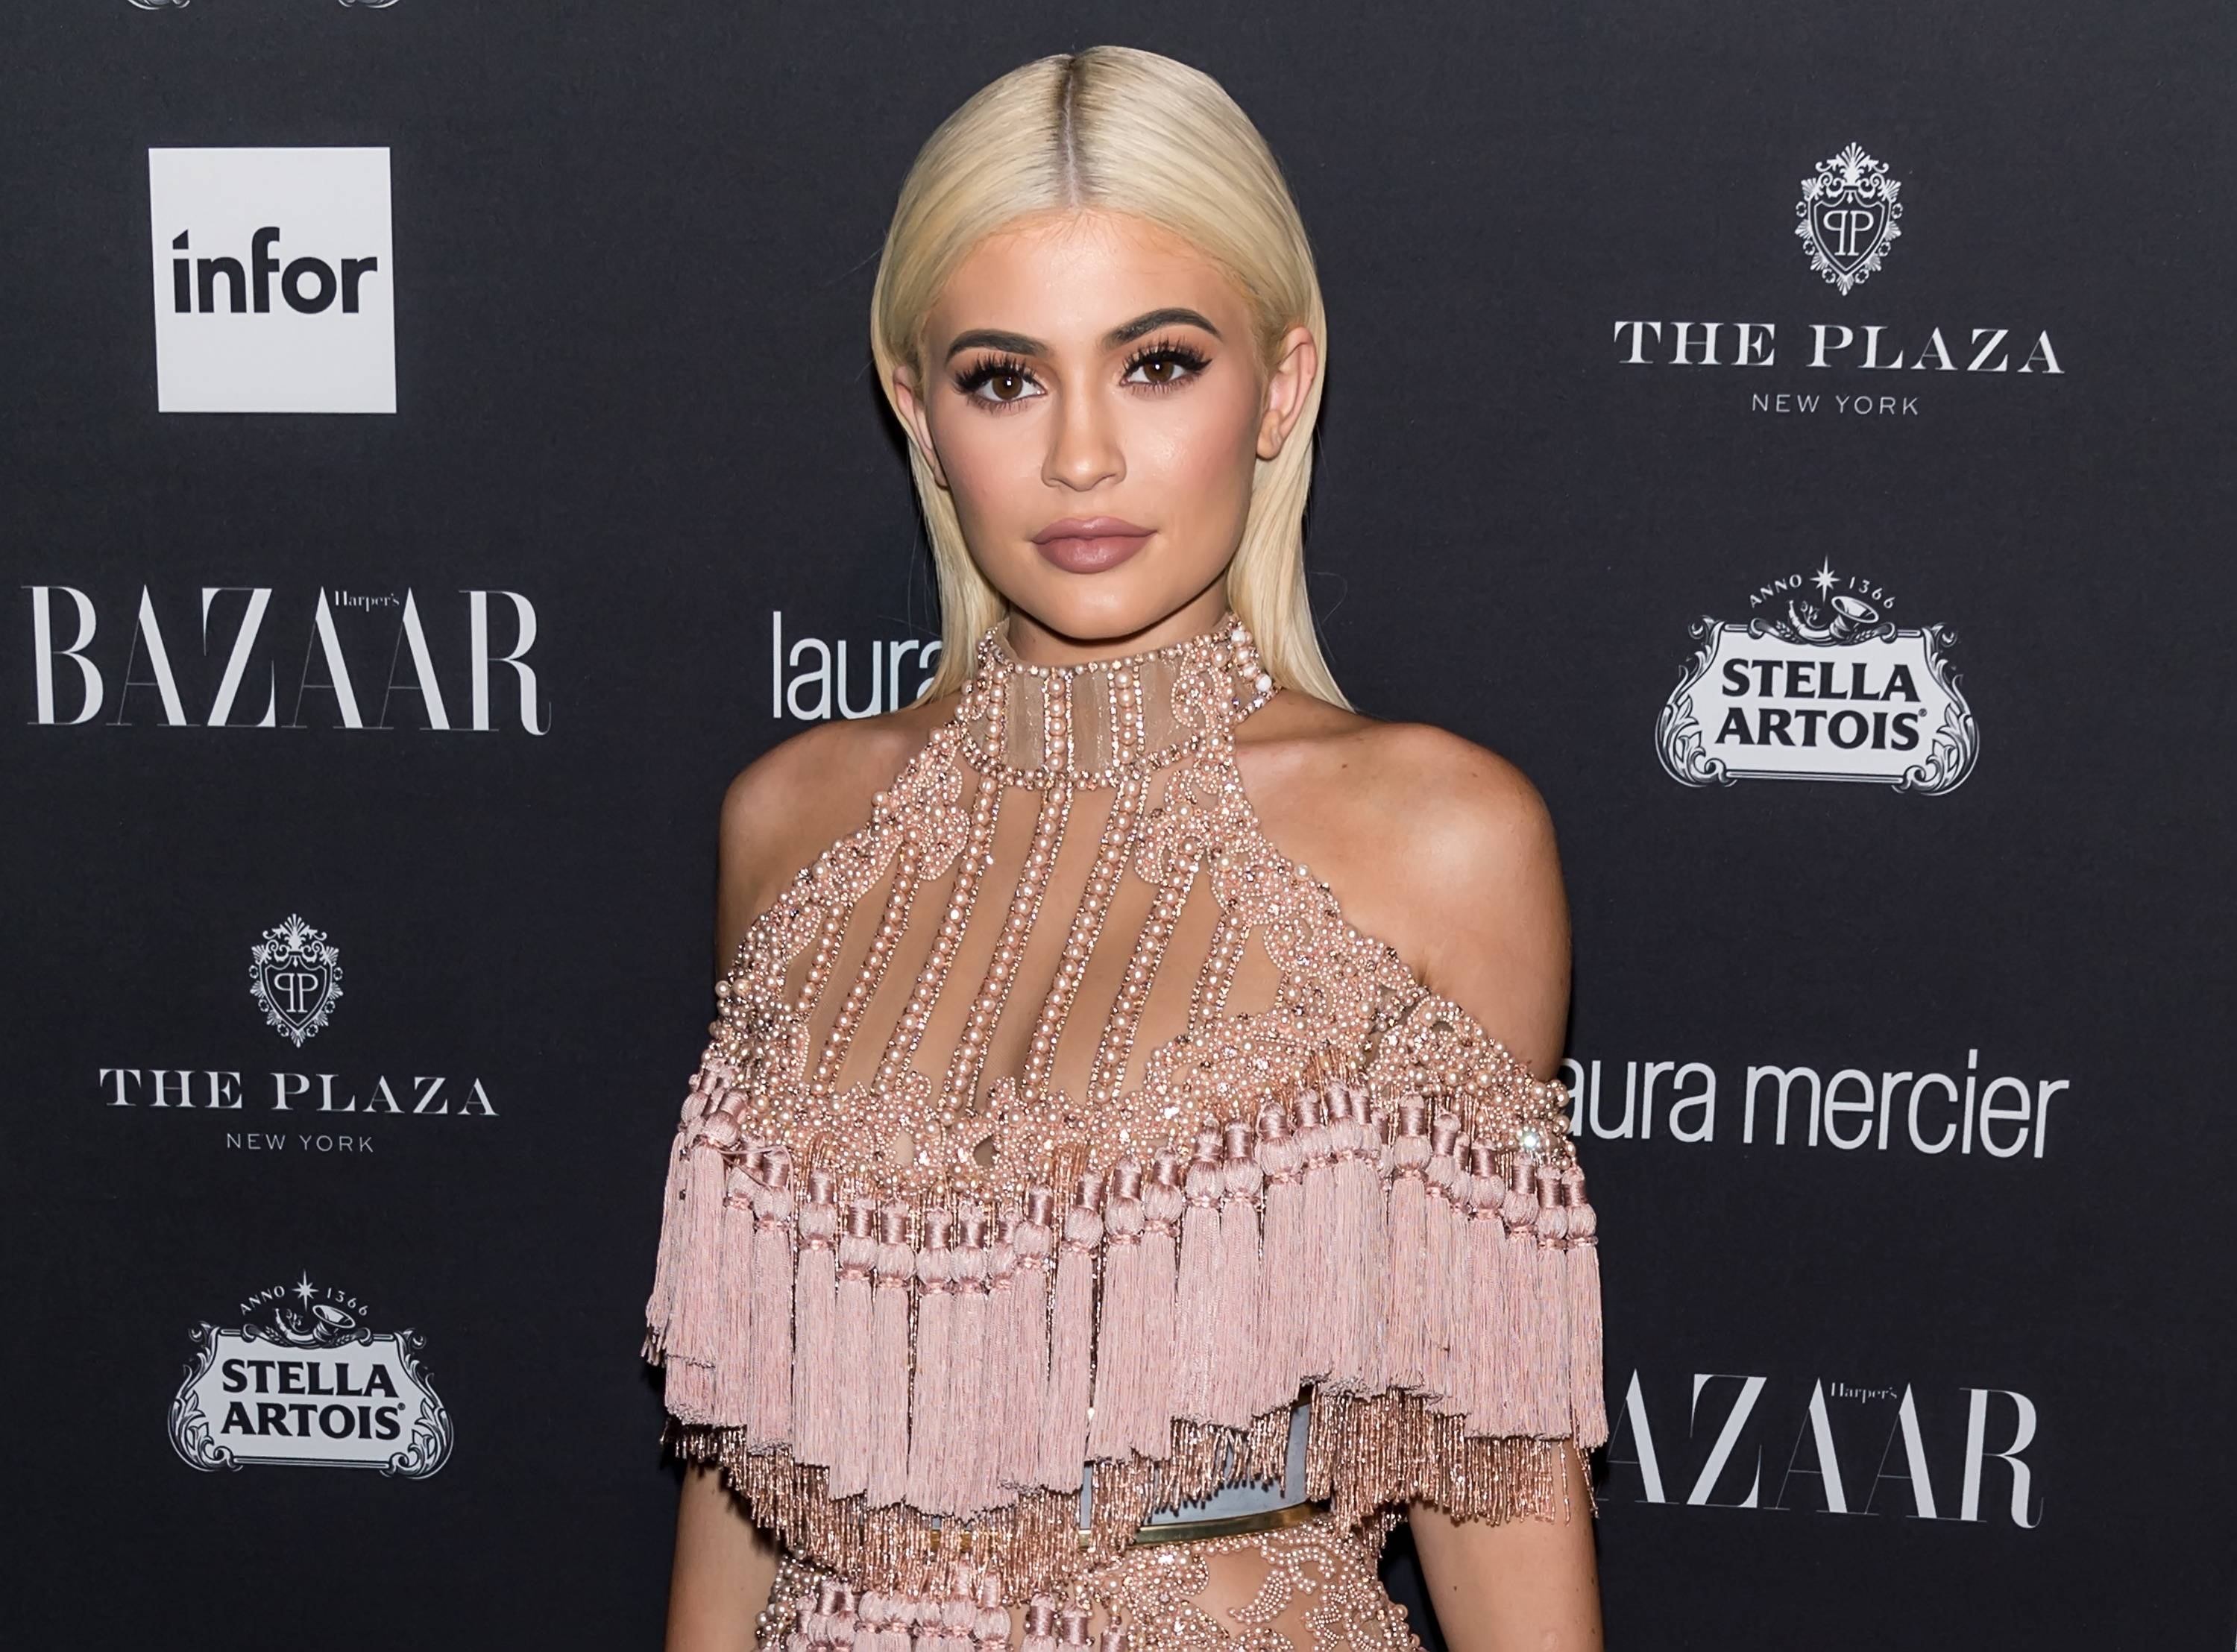 Kylie Jenner Matches Her Fendi Dress to Stormi's Stroller - Kylie